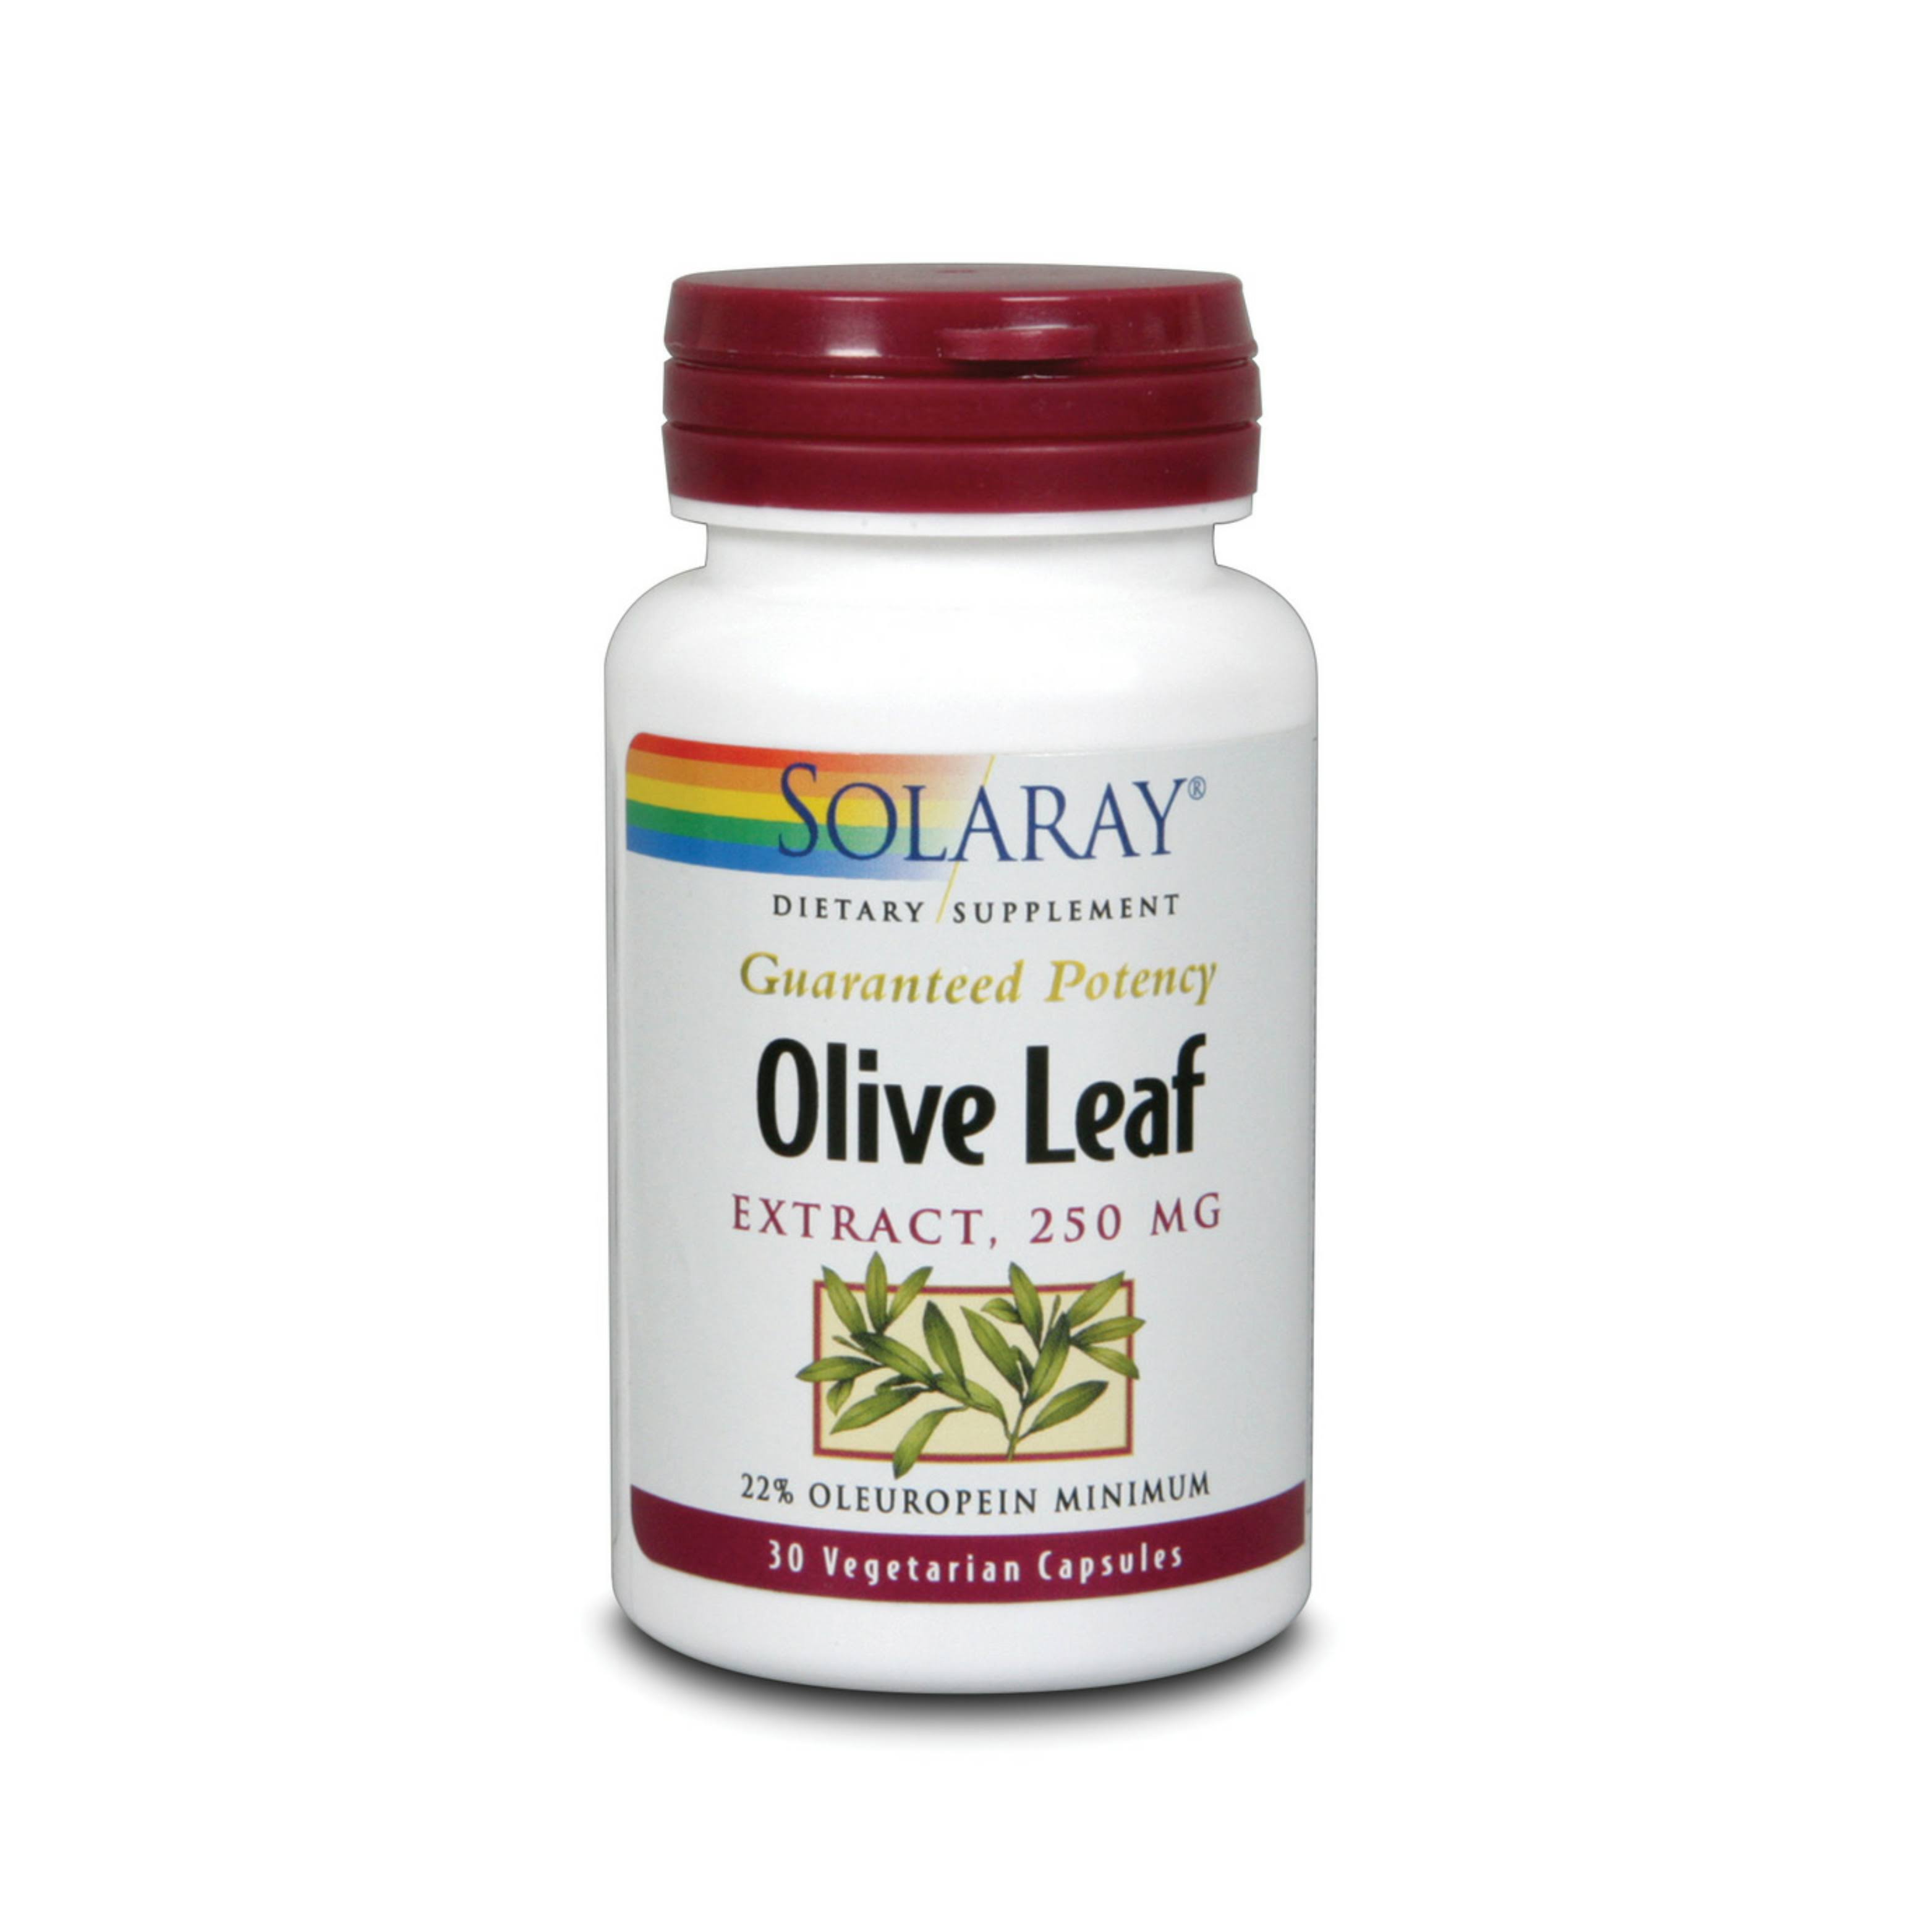 Solaray Olive Leaf Extract Dietary Supplement - 30ct